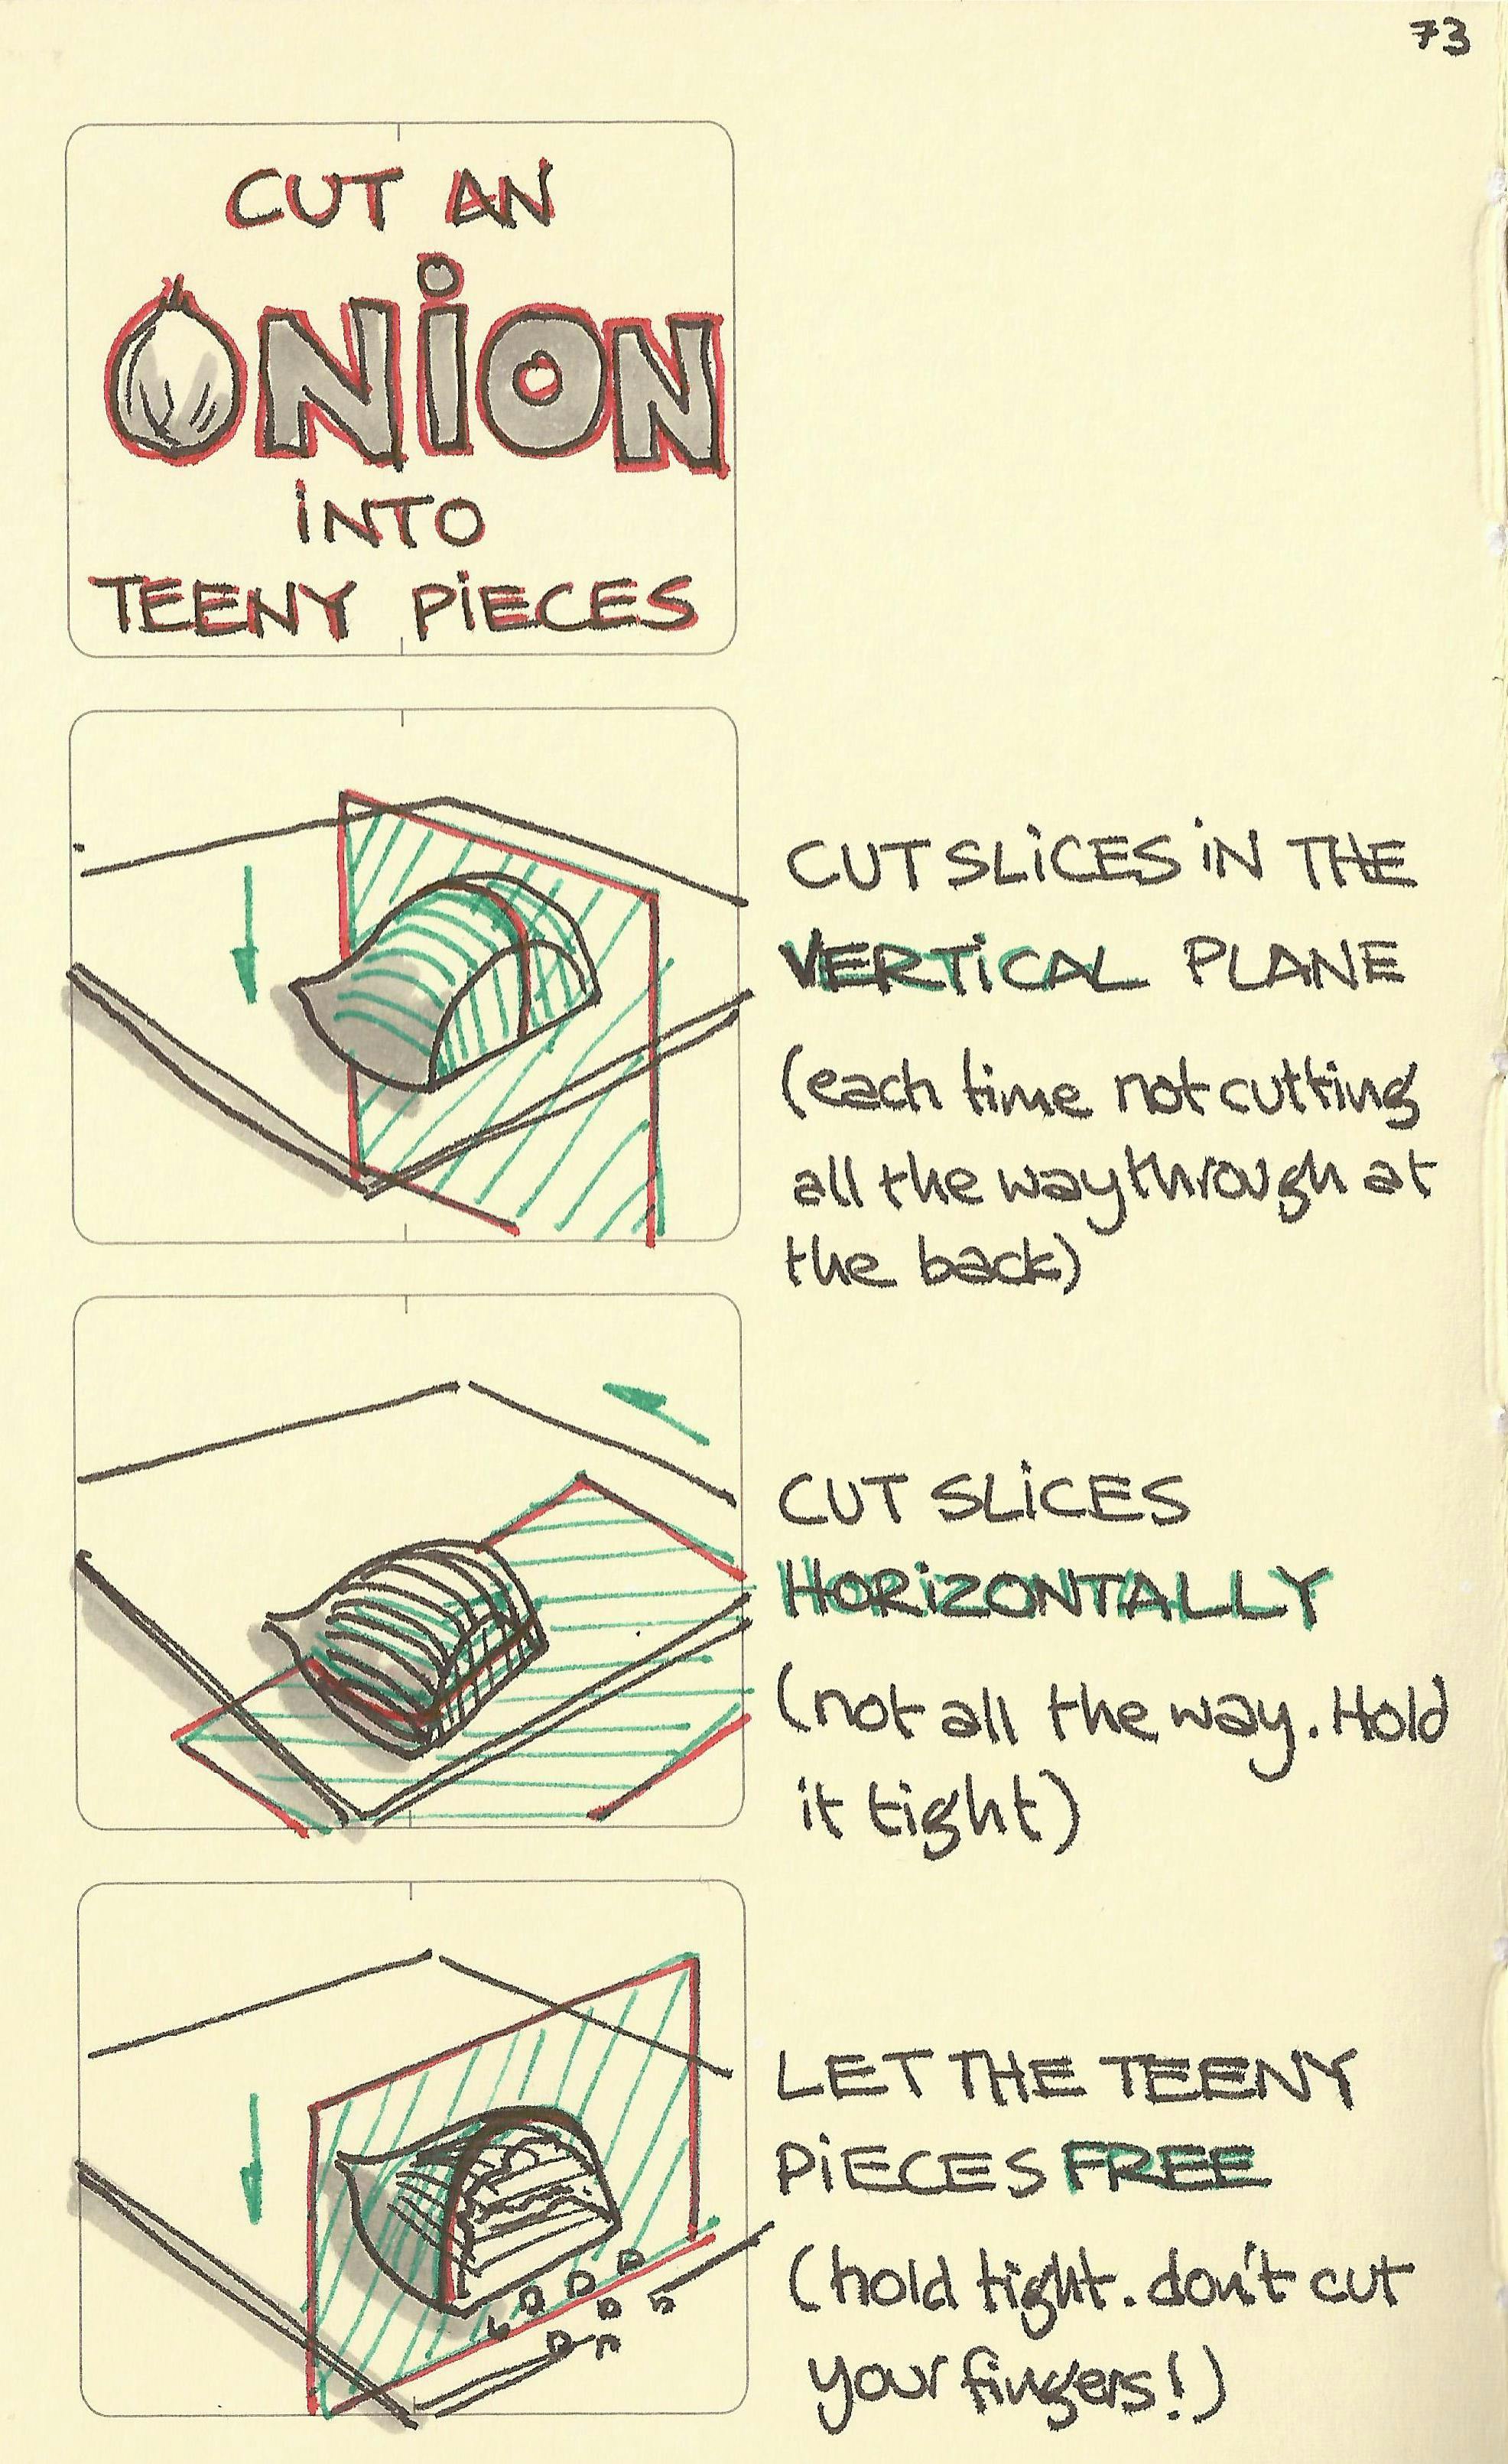 Cut an onion into teeny pieces - Sketchplanations